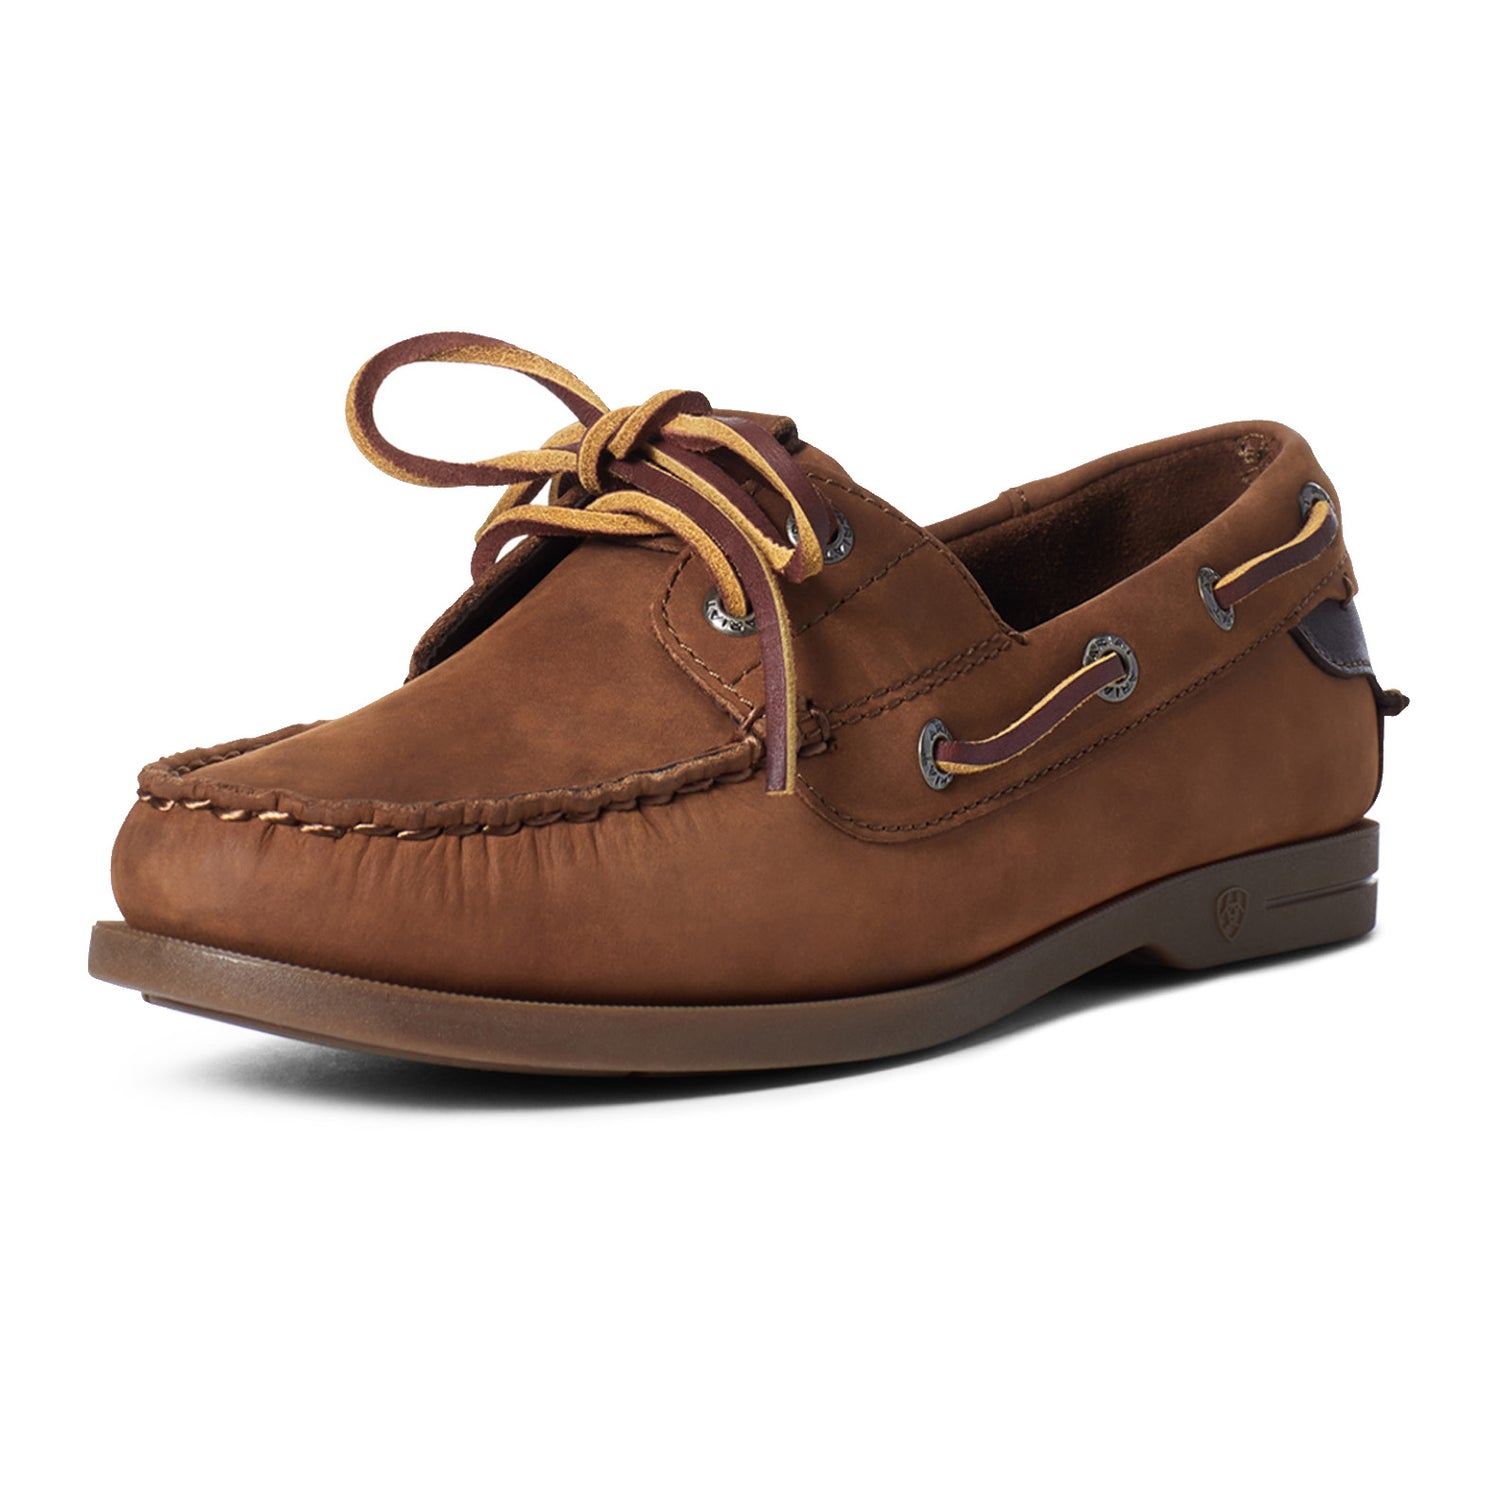 Ariat-Womens-Antigua-Boat-Shoes